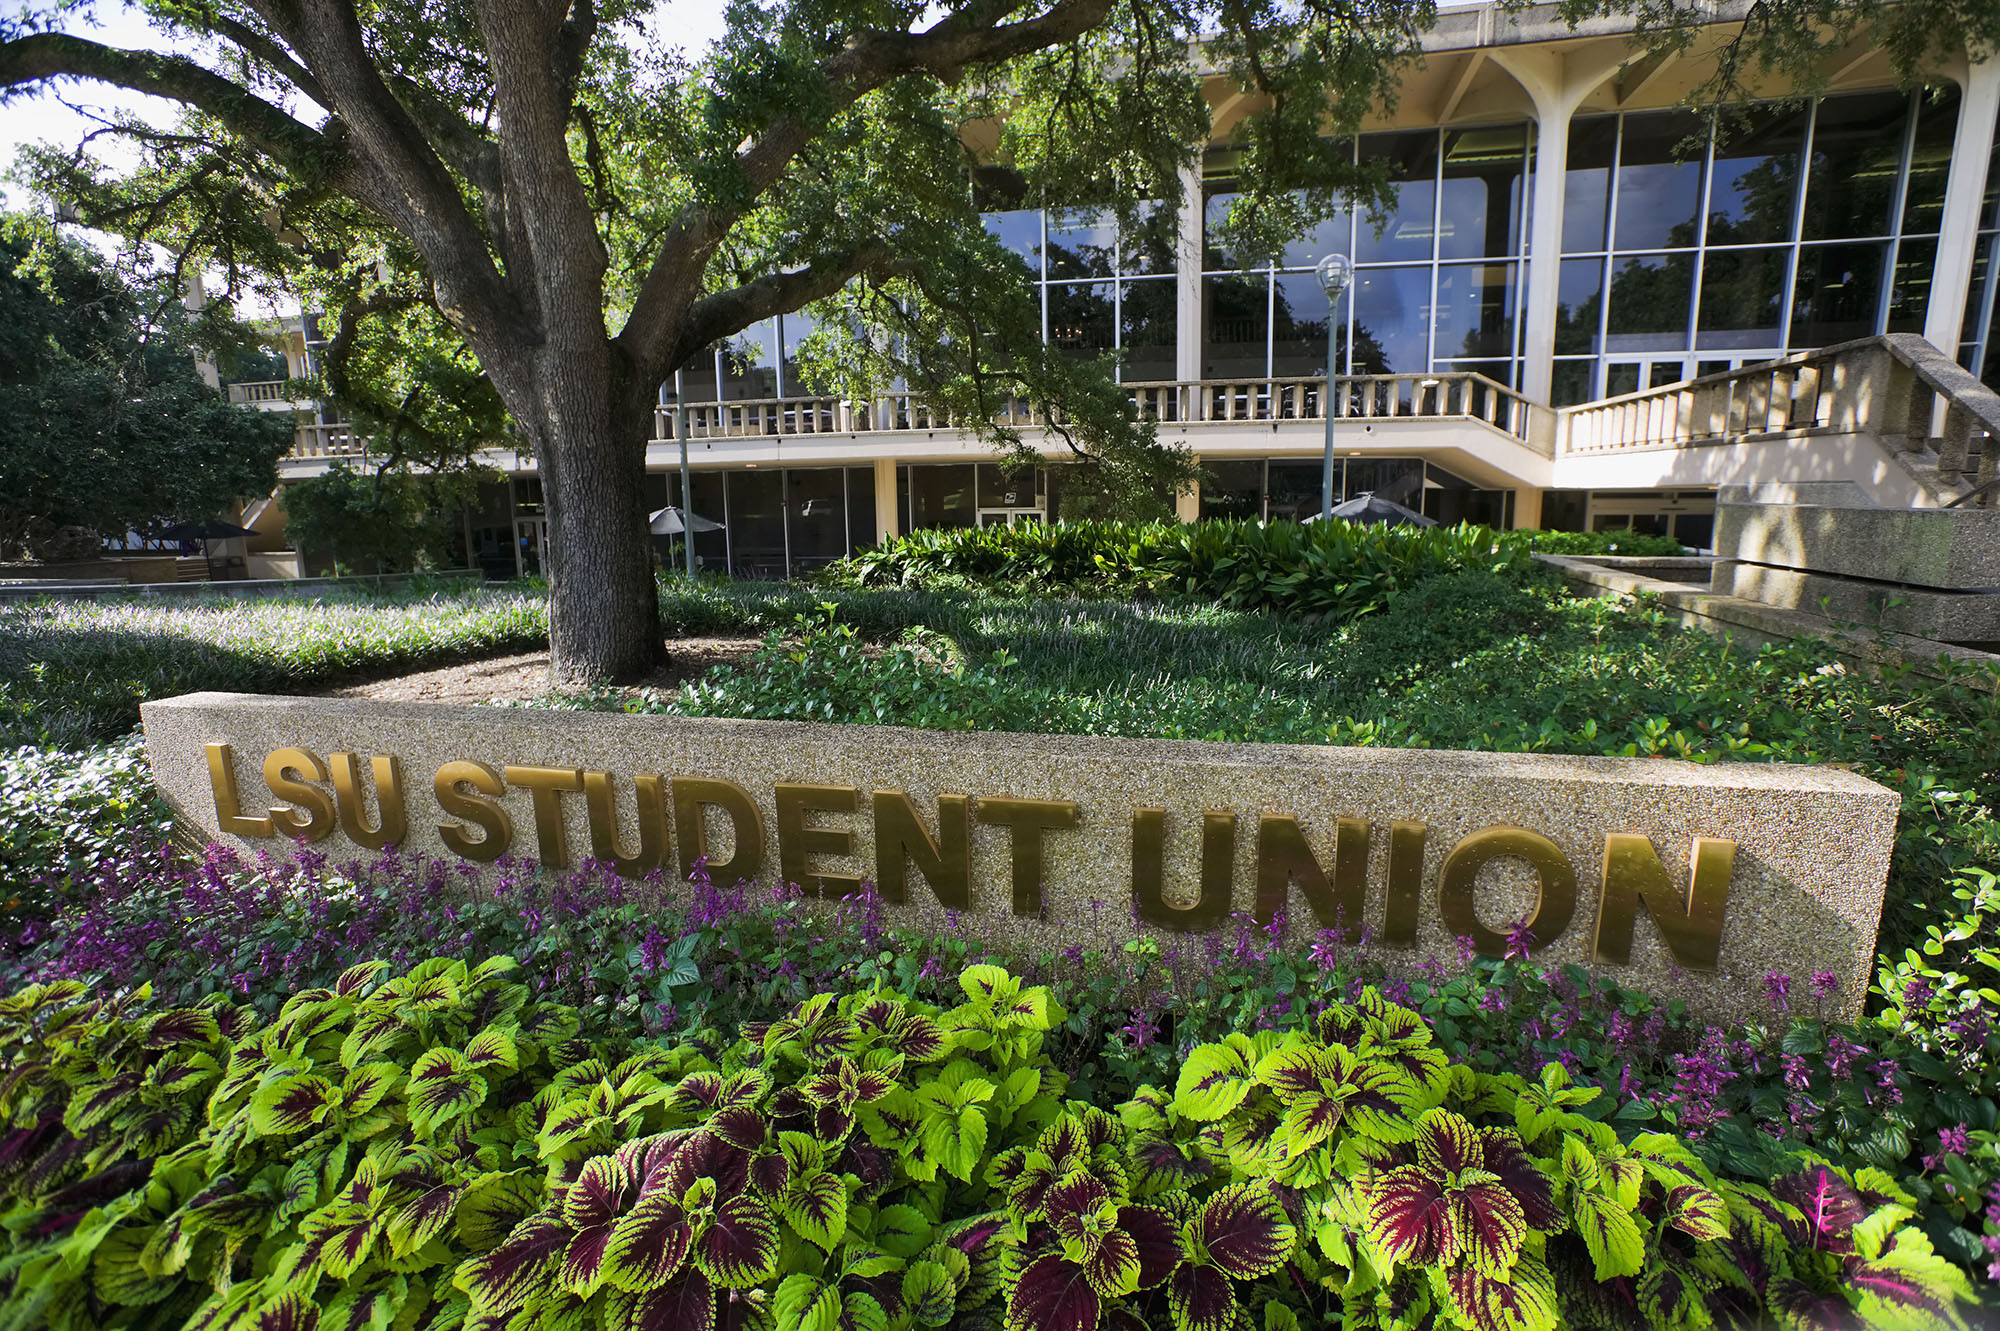 A sign in front of the LSU Student Union